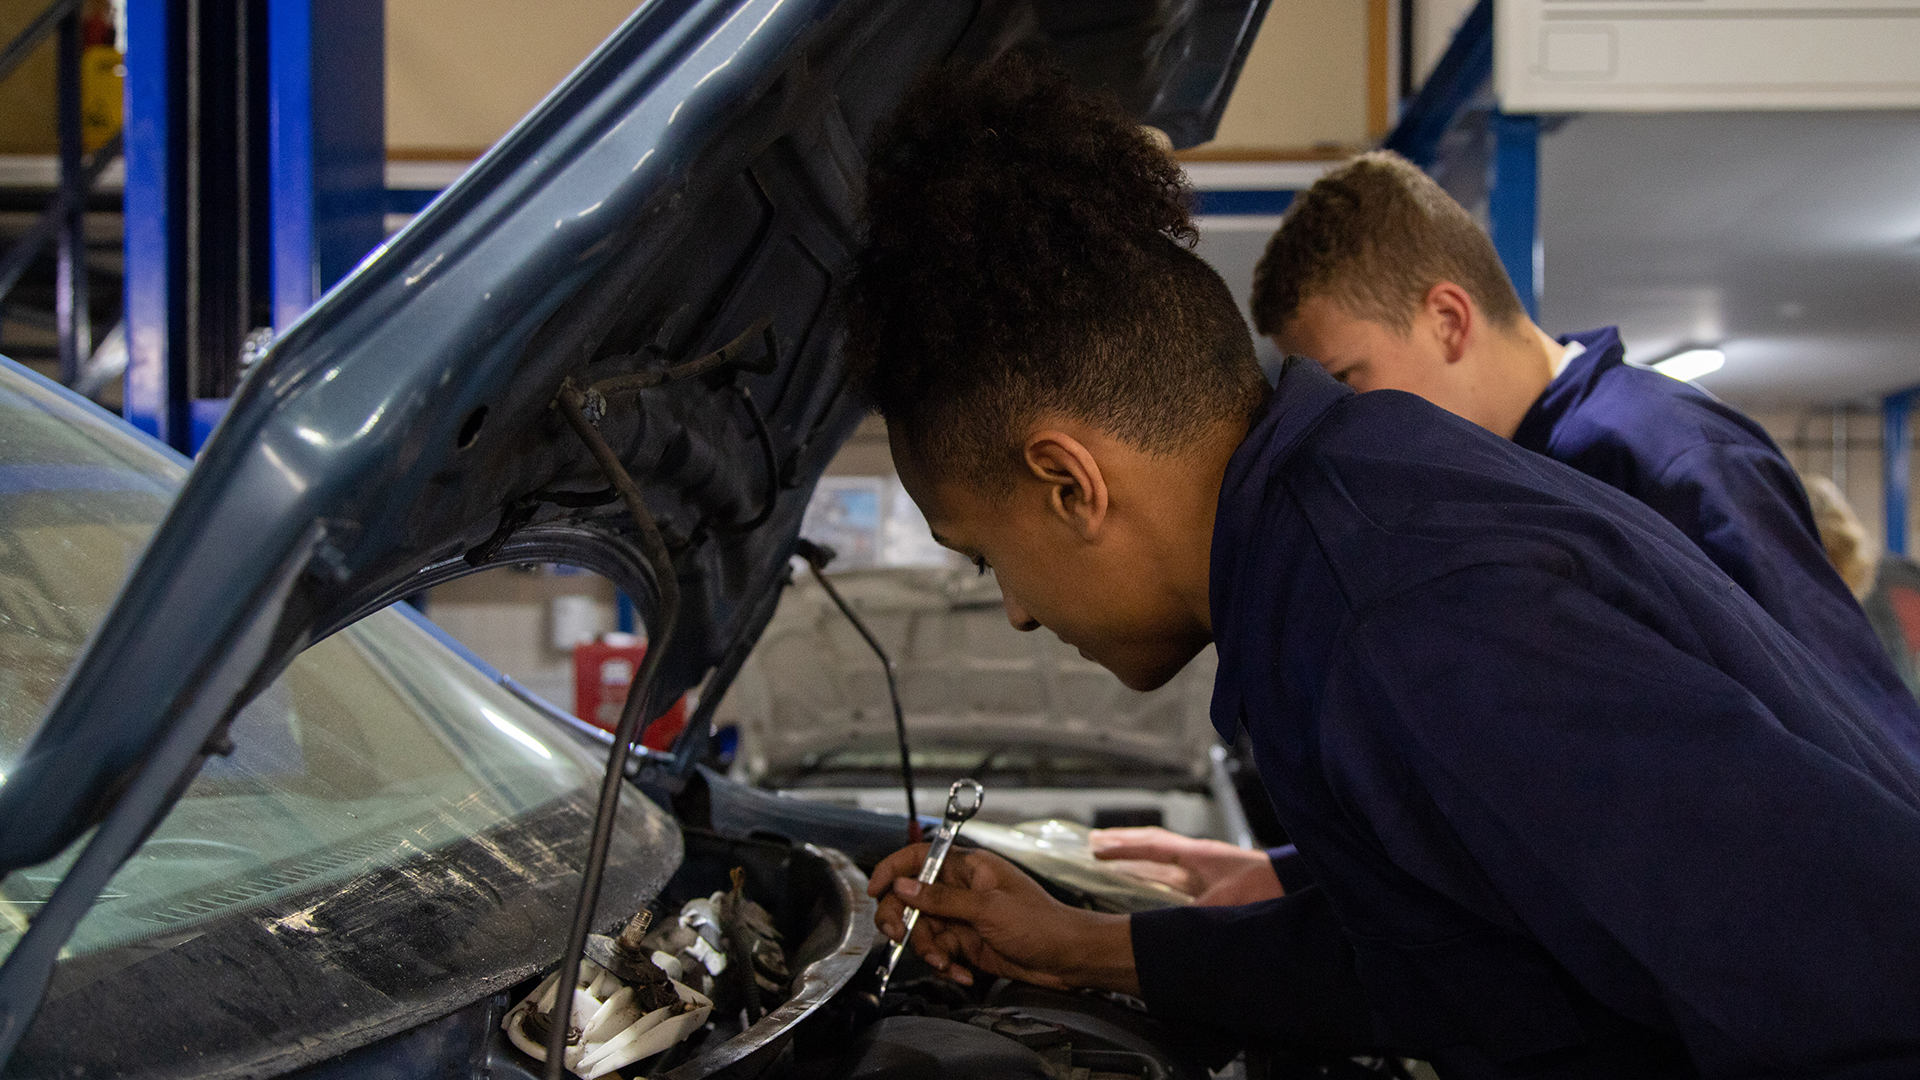 image of education learner working on a car